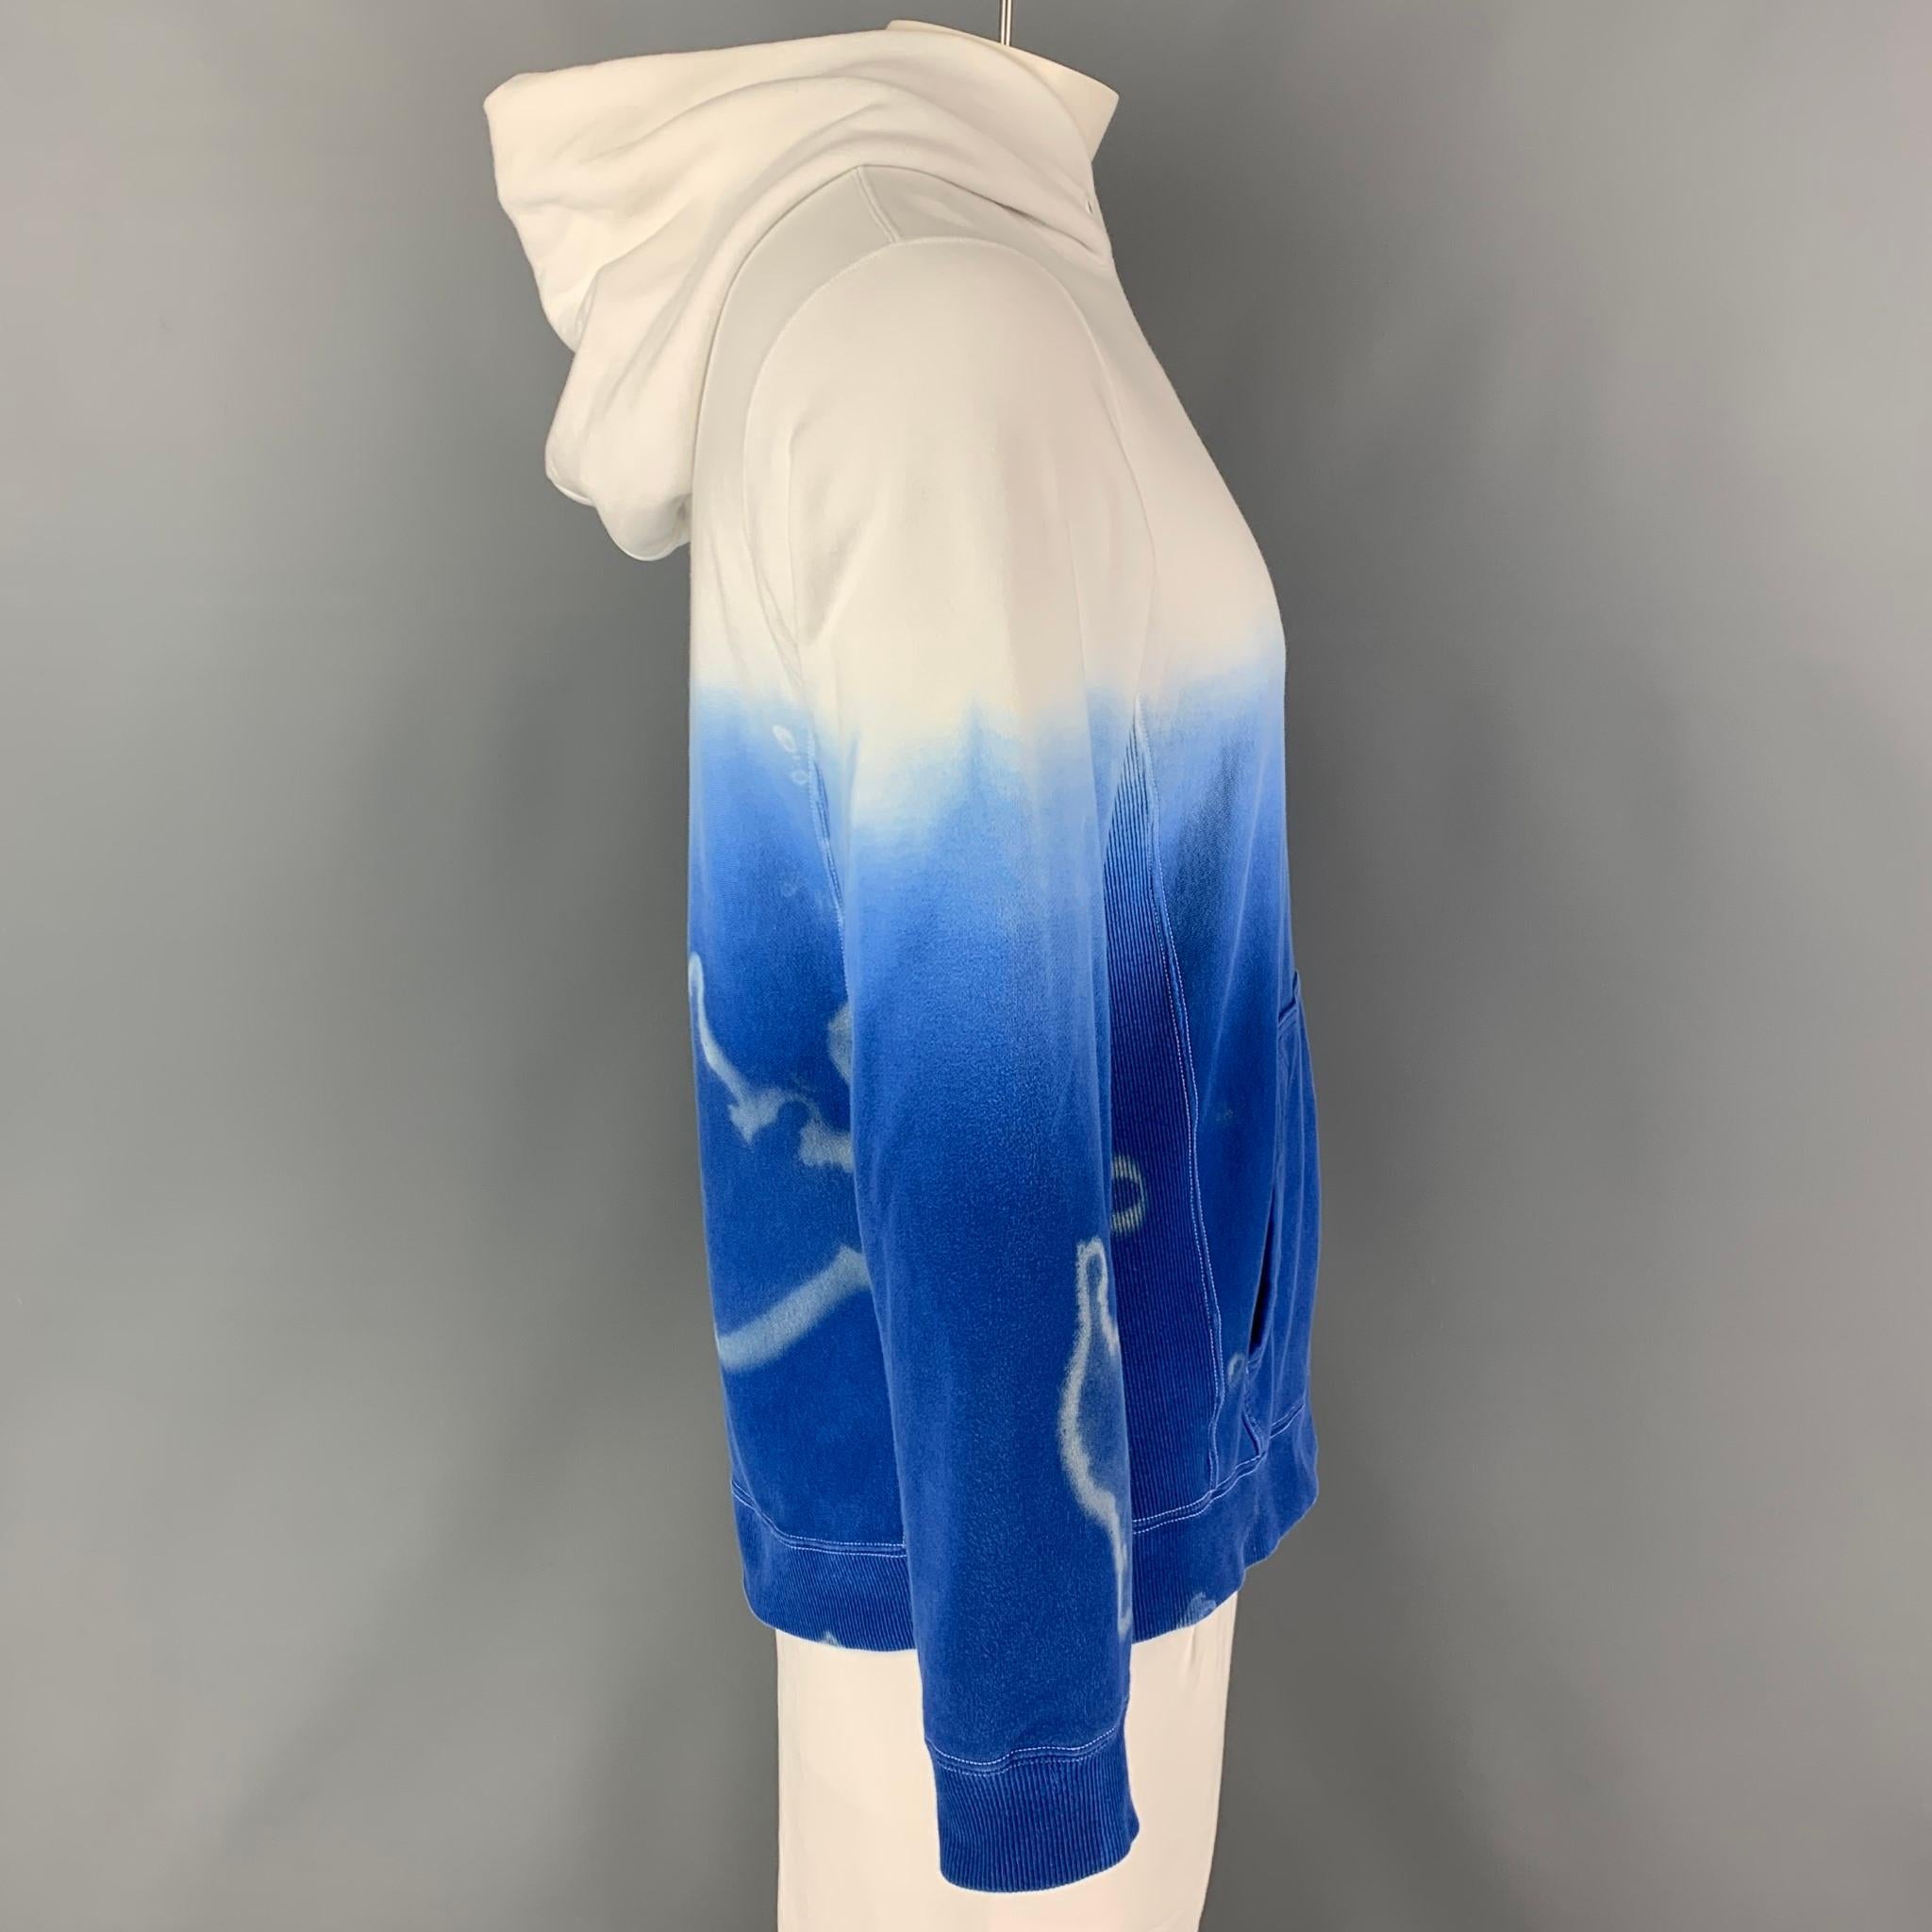 COMME des GARCONS GANRYU sweatshirt comes in a blue & white ombre cotton featuring a hooded style, ribbed side panels, contrast stitching, and a front pouch pocket. Made in Japan. Custom made by local artist Adam Brit. 

Excellent Pre-Owned